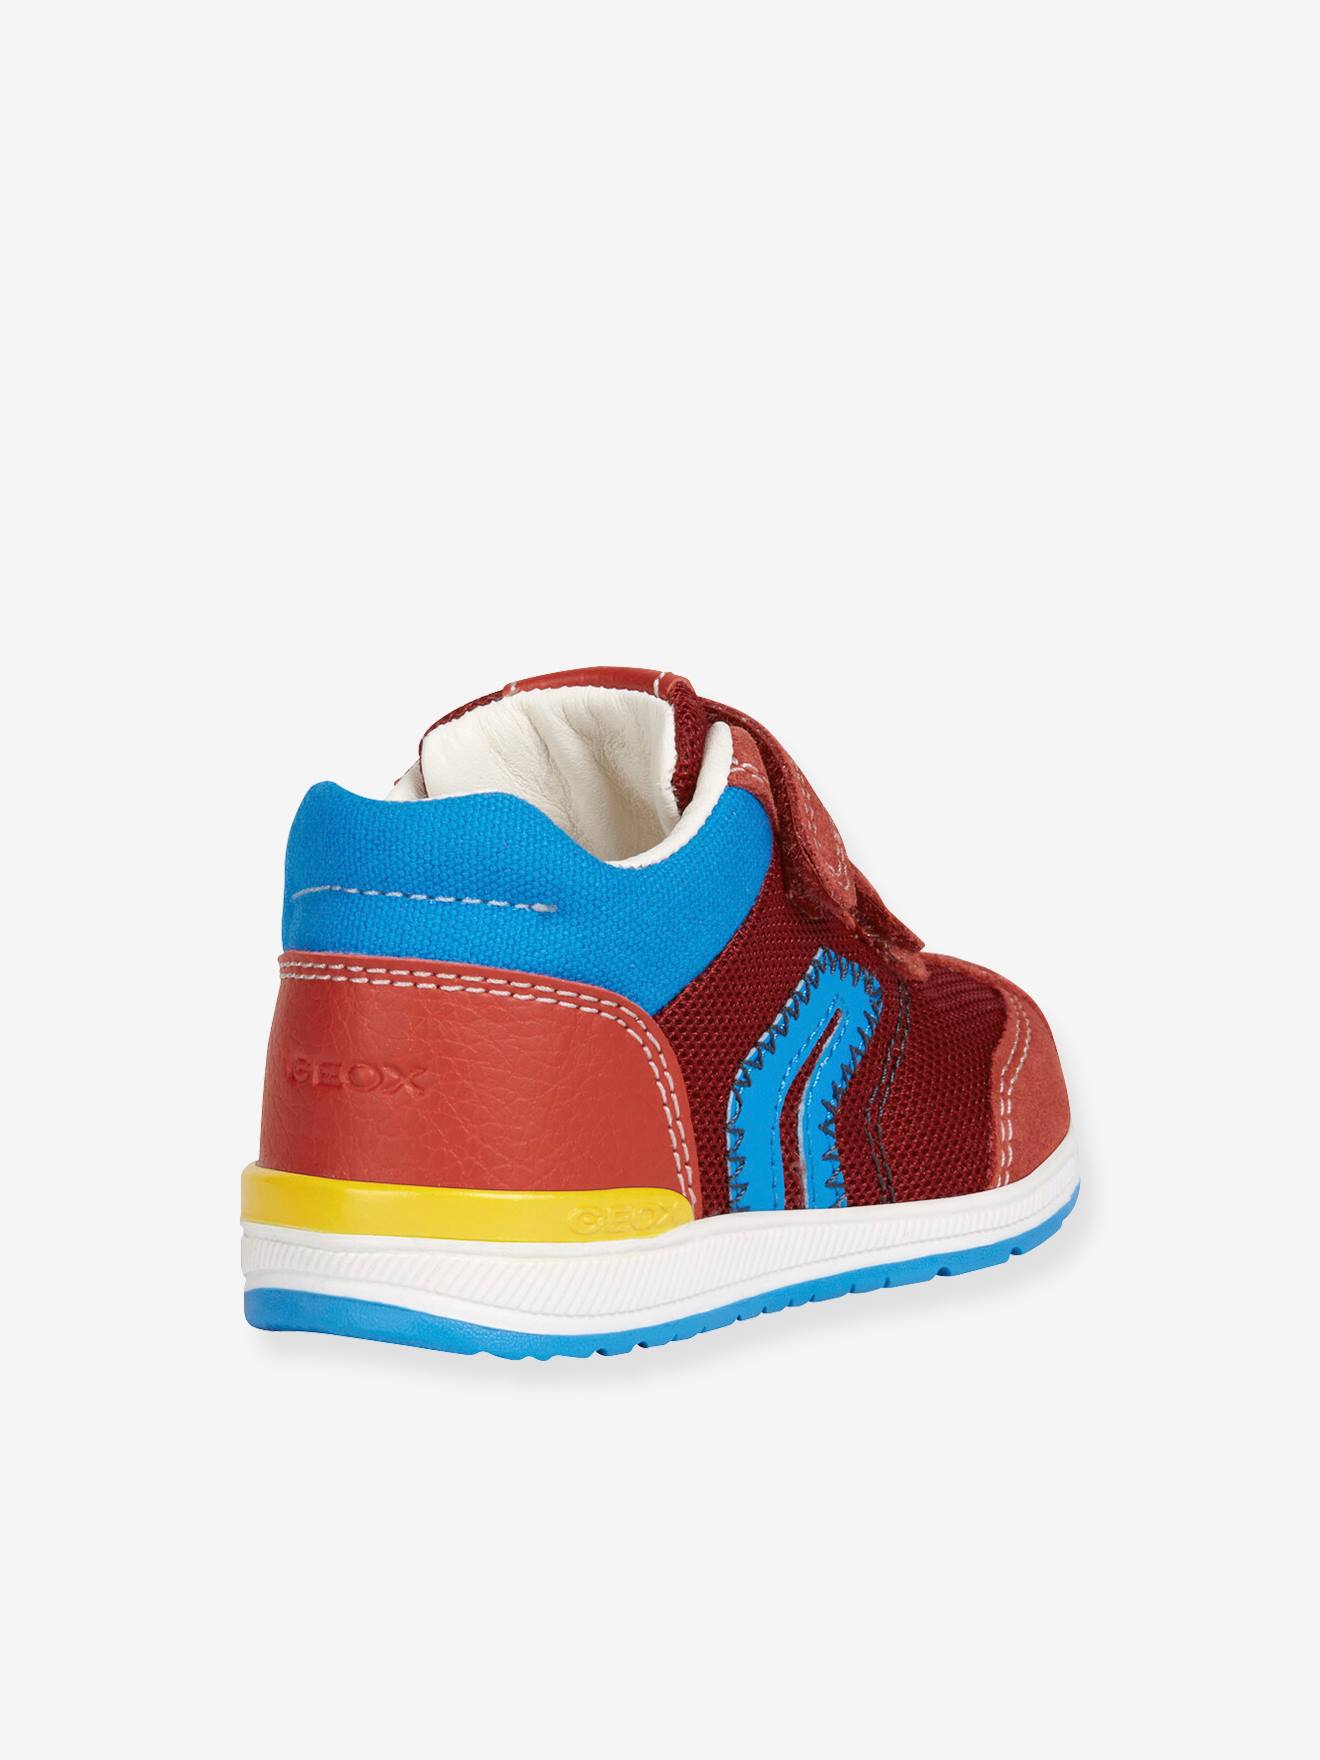 Trainers for Baby Boys, Rishon by GEOX 